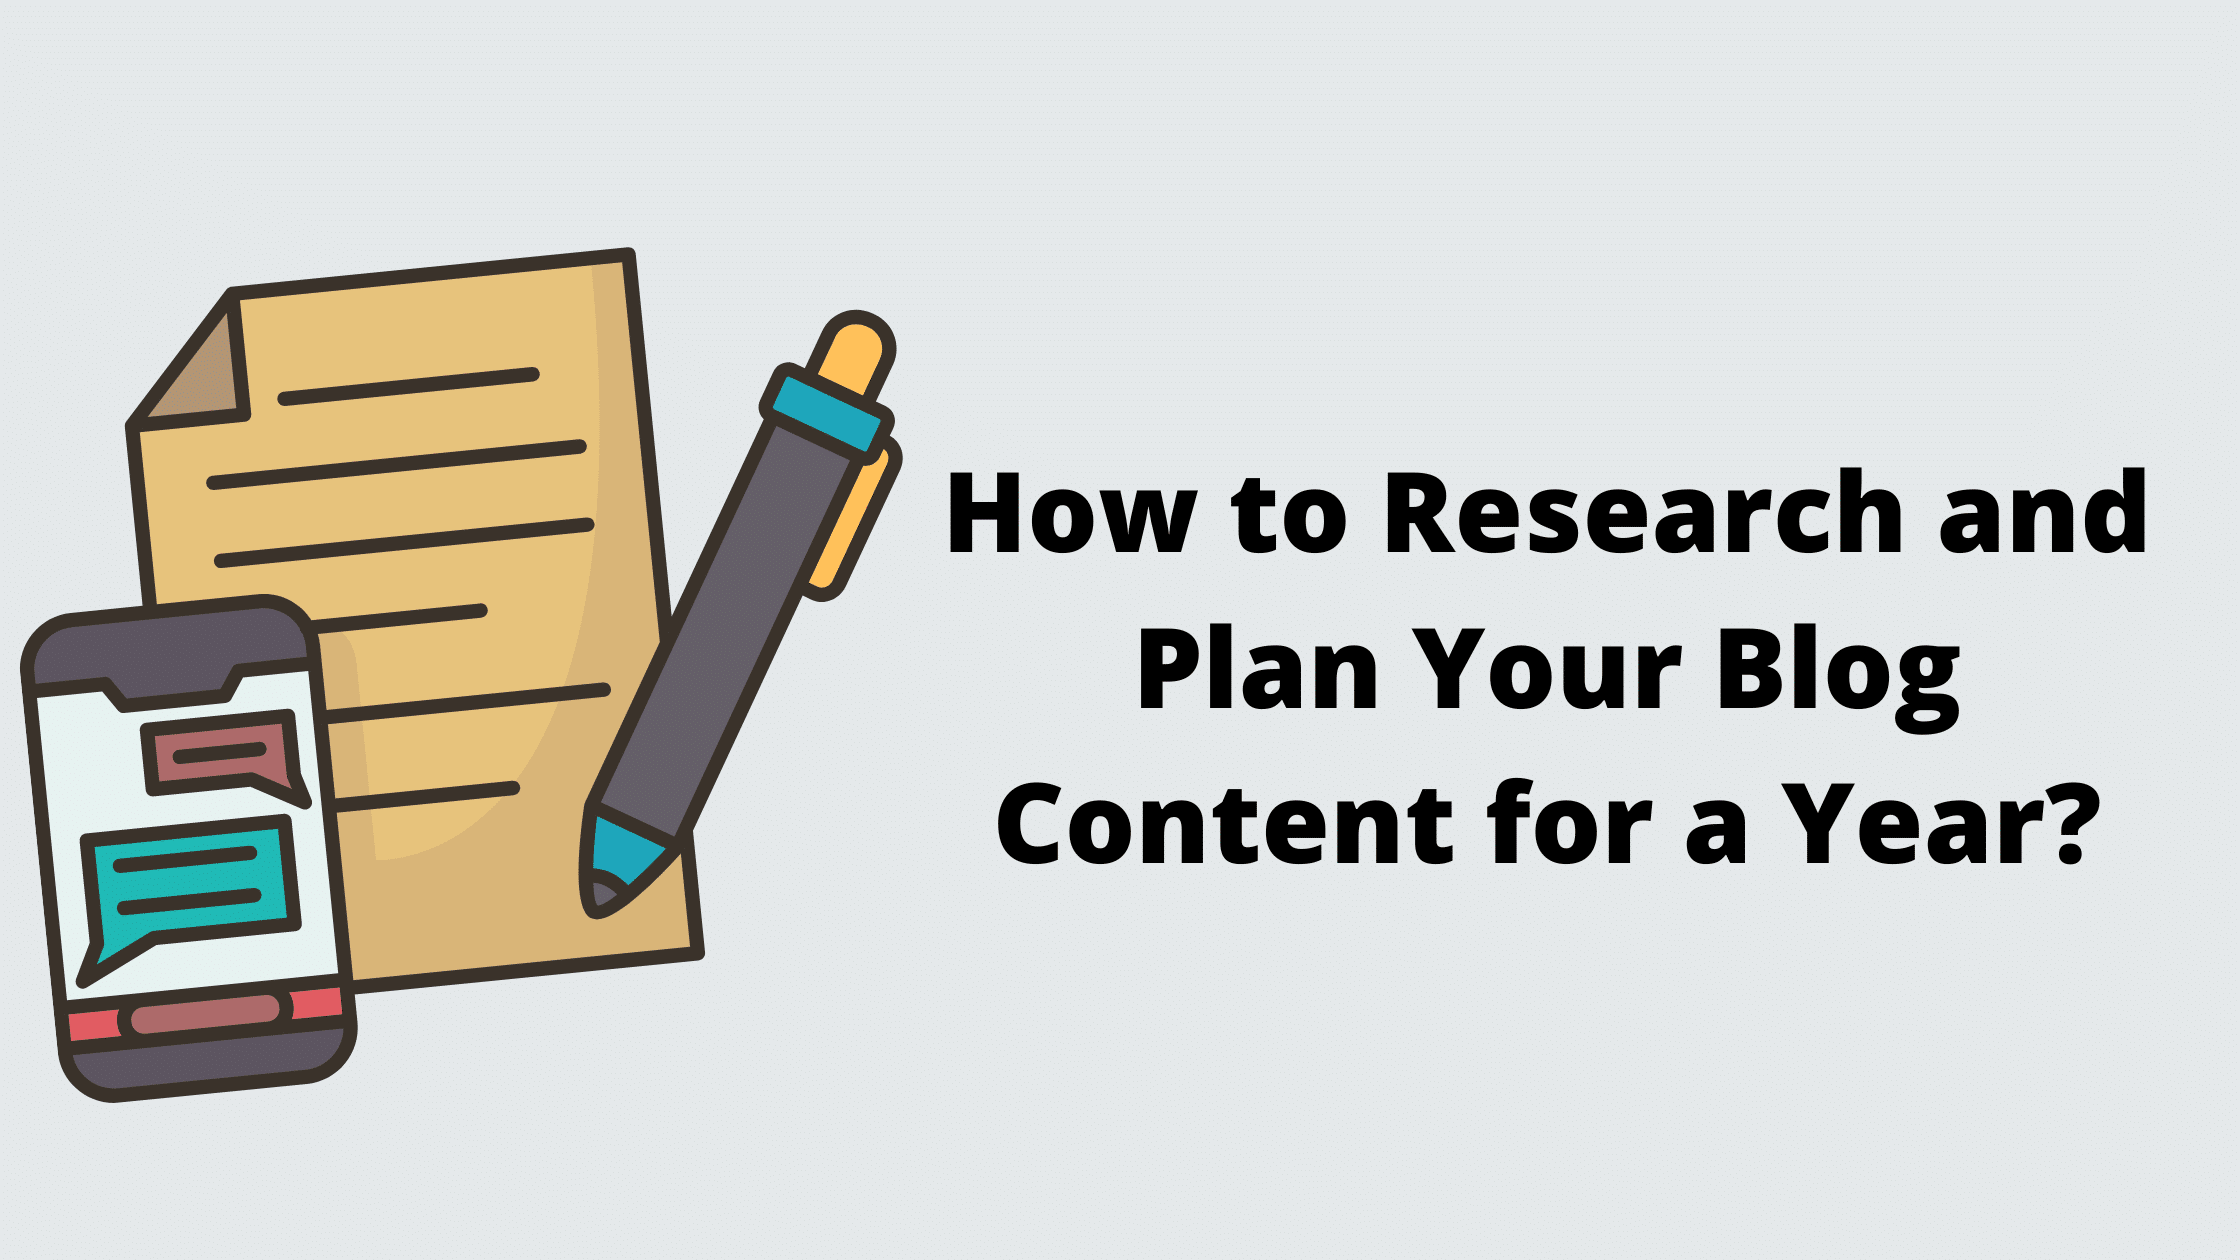 How to Research and Plan Your Blog Content for a Year?